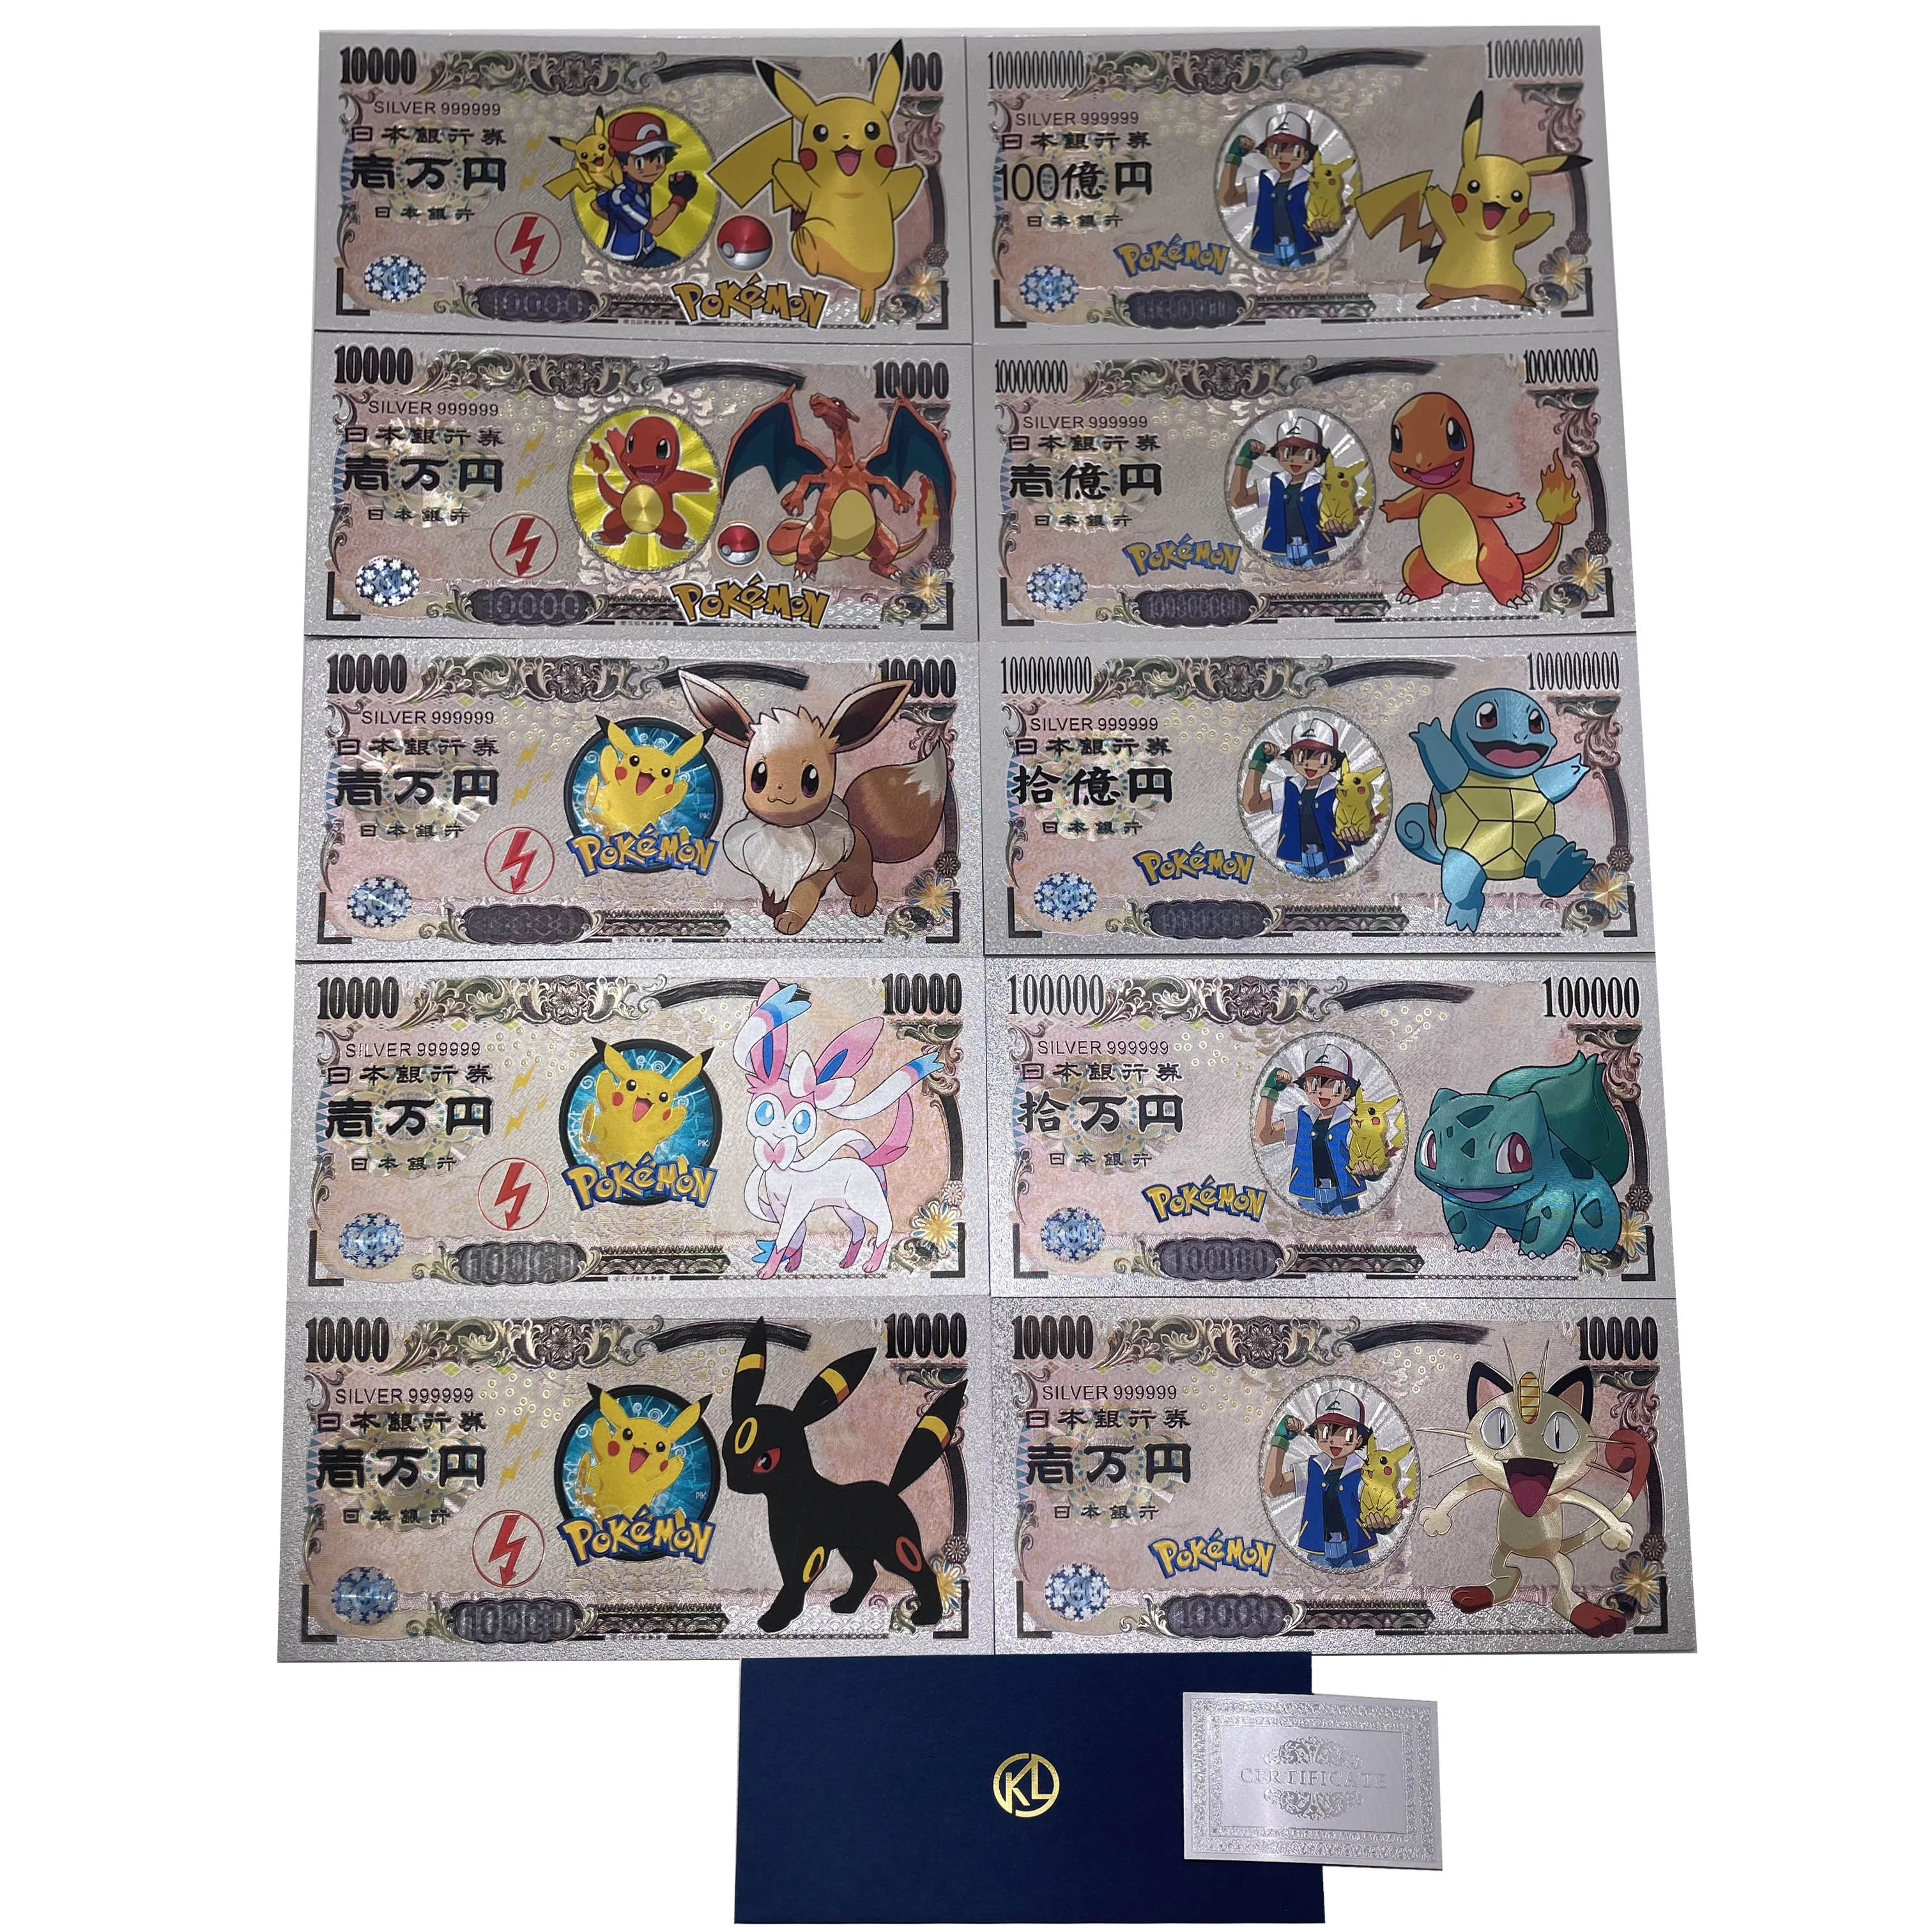 New 10types Pokeman Silver foil cards Pocket monster toy game tickets Anime Battle Trainer Card Hot sale